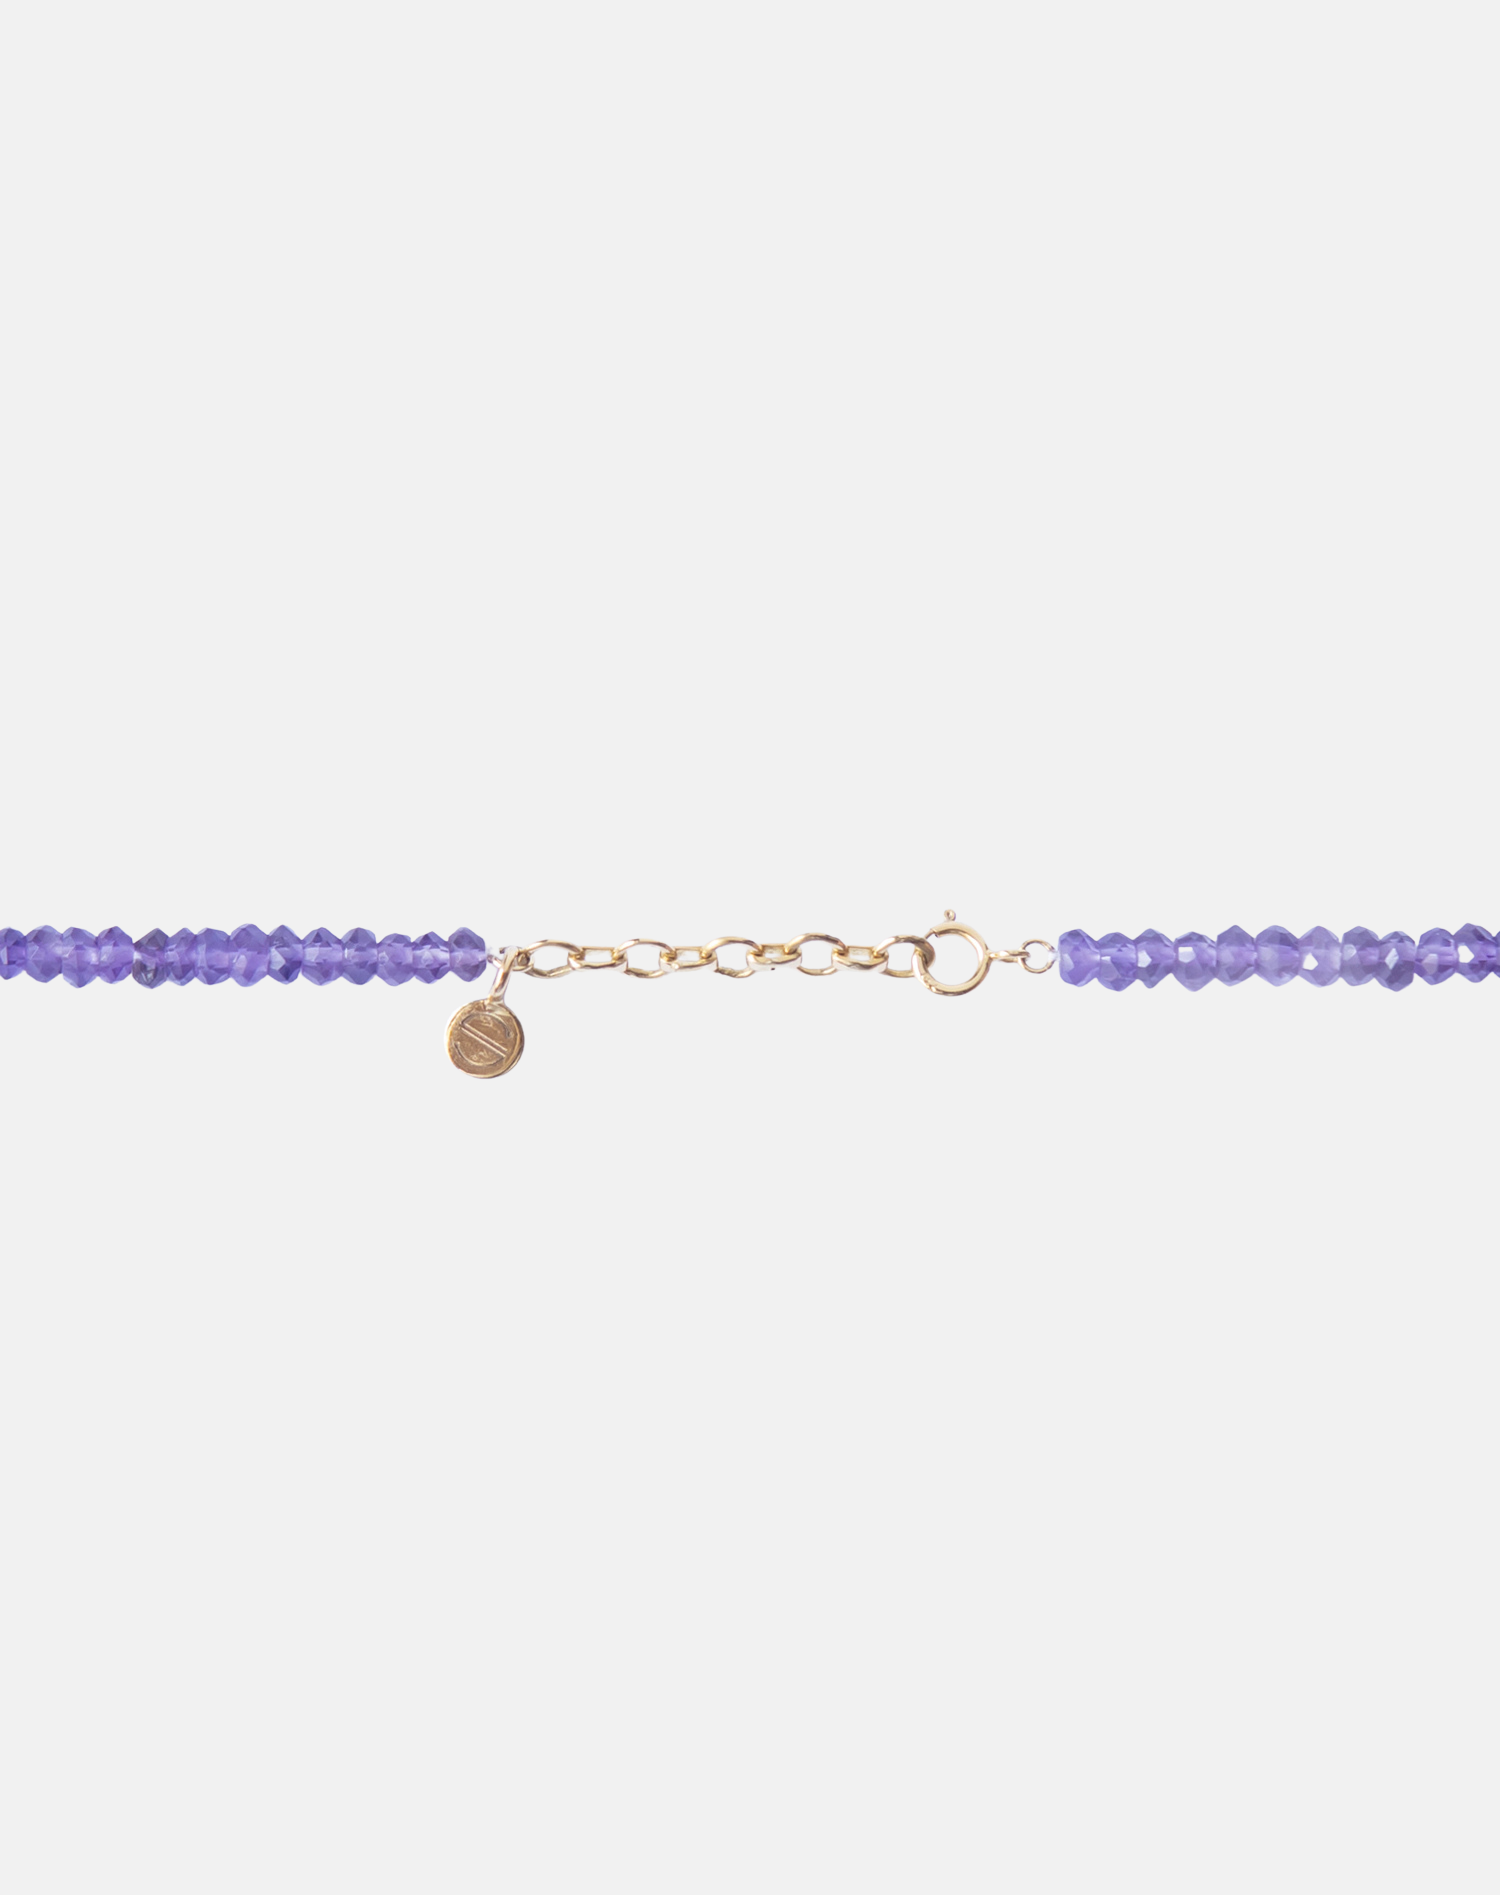 Necklace with imitation amethyst beads silver | THOMAS SABO